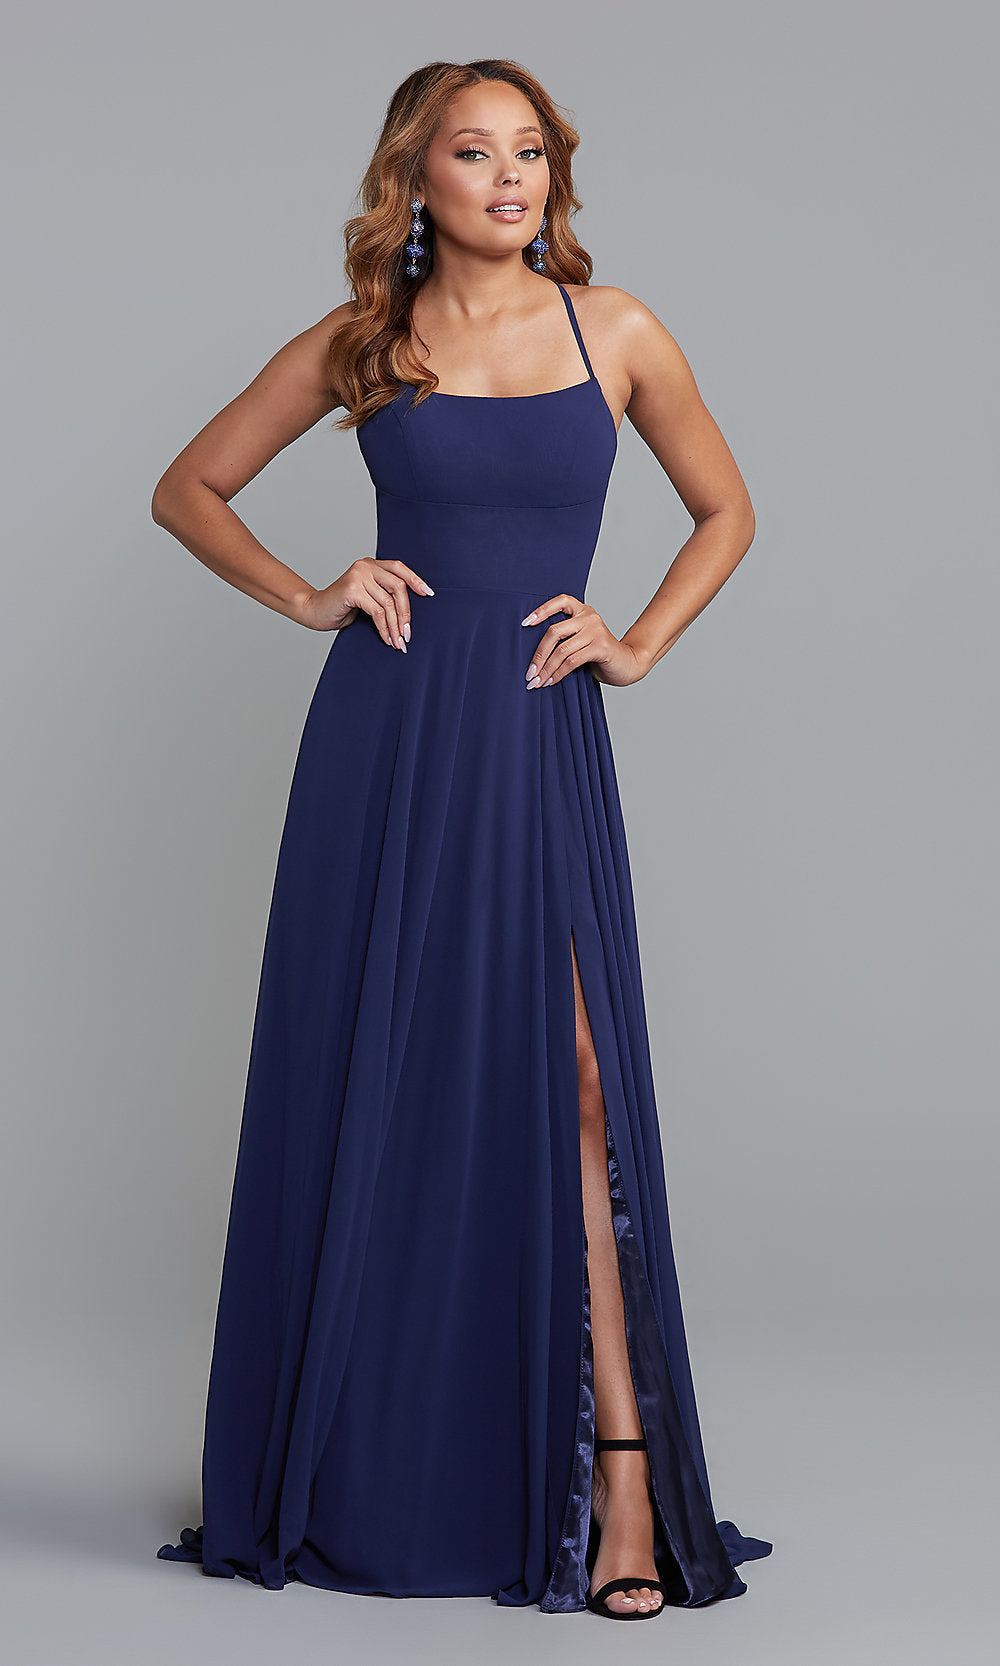 Square-Neck Long Chiffon Formal Prom Dress by PromGirl